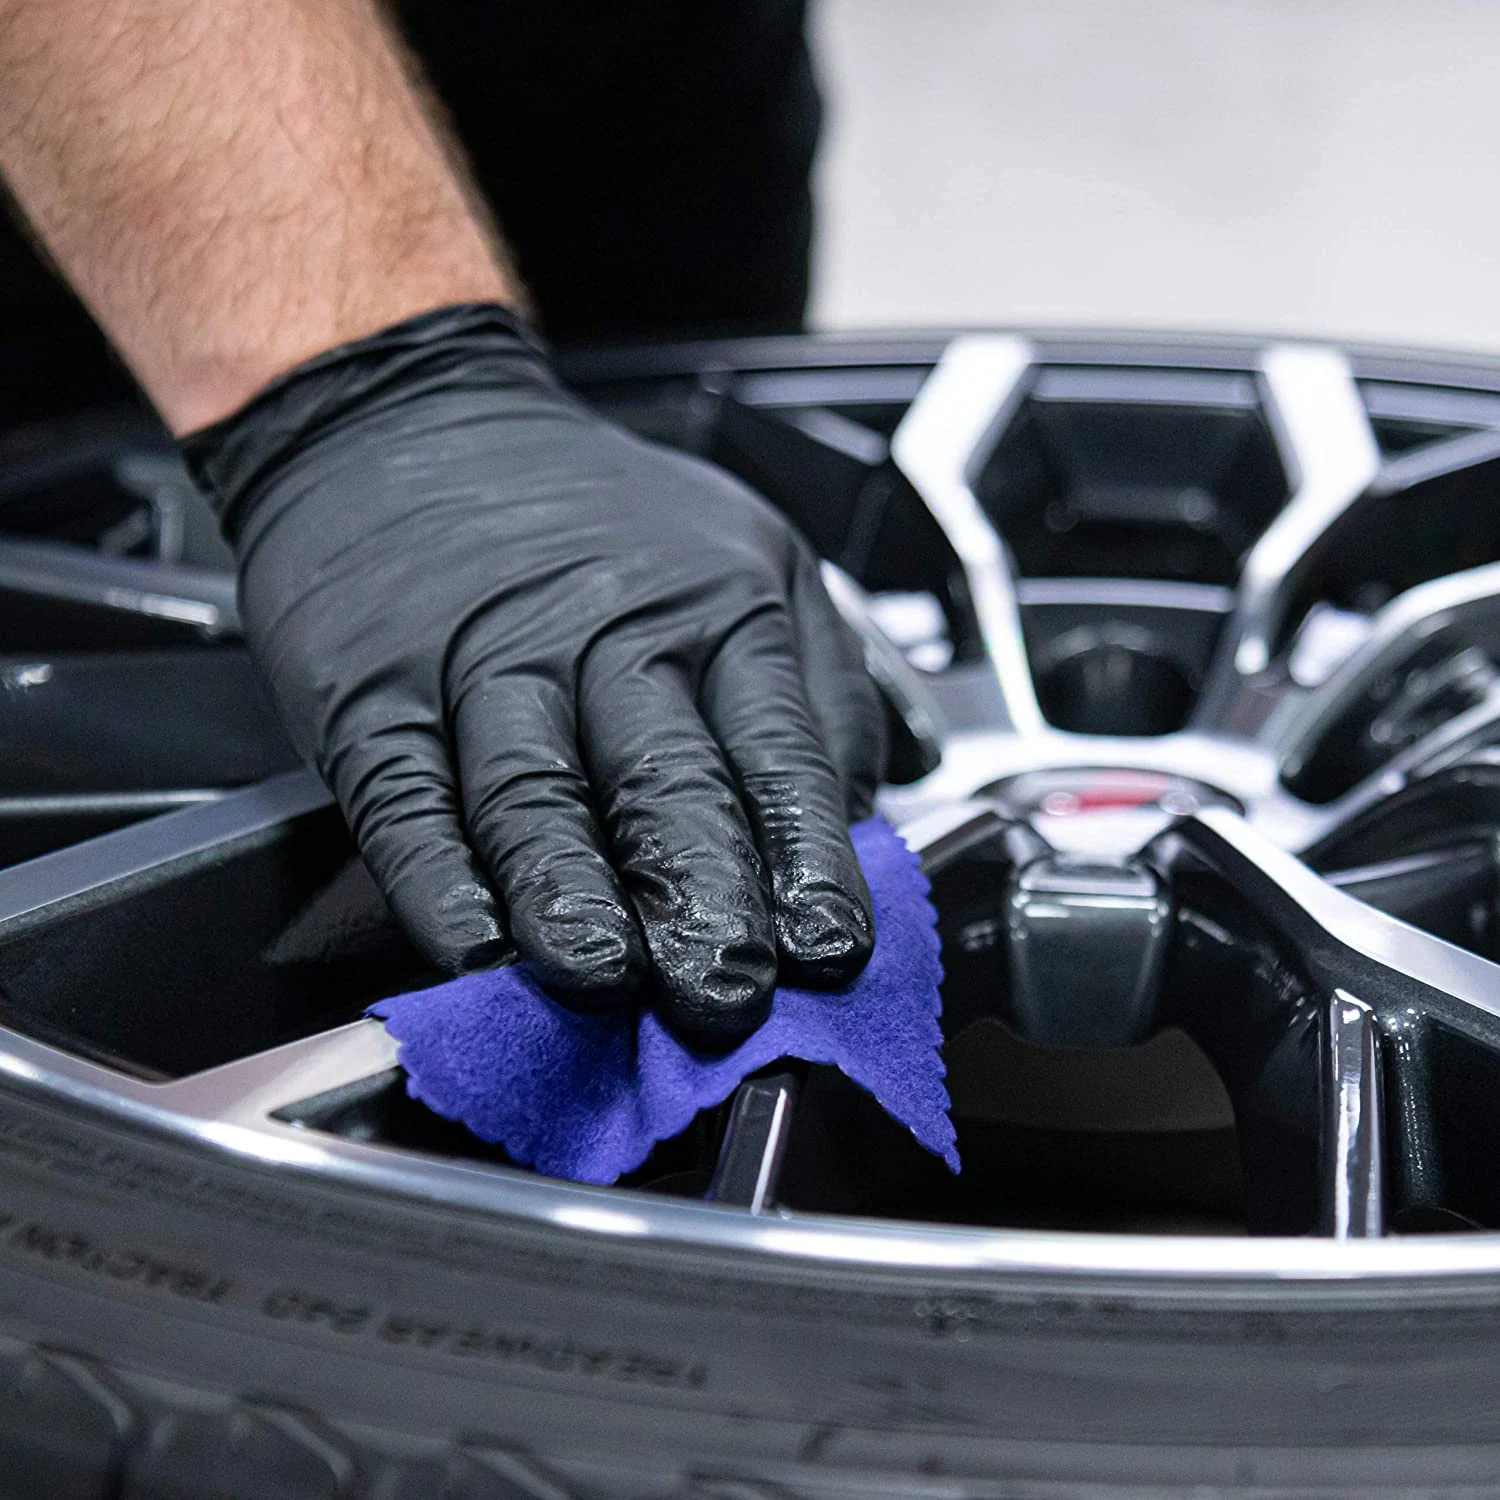 Hand in a black glove applying a final smoothing to a wheel with a blue microfiber cloth, part of the ceramic coating process for enhanced durability and shine.